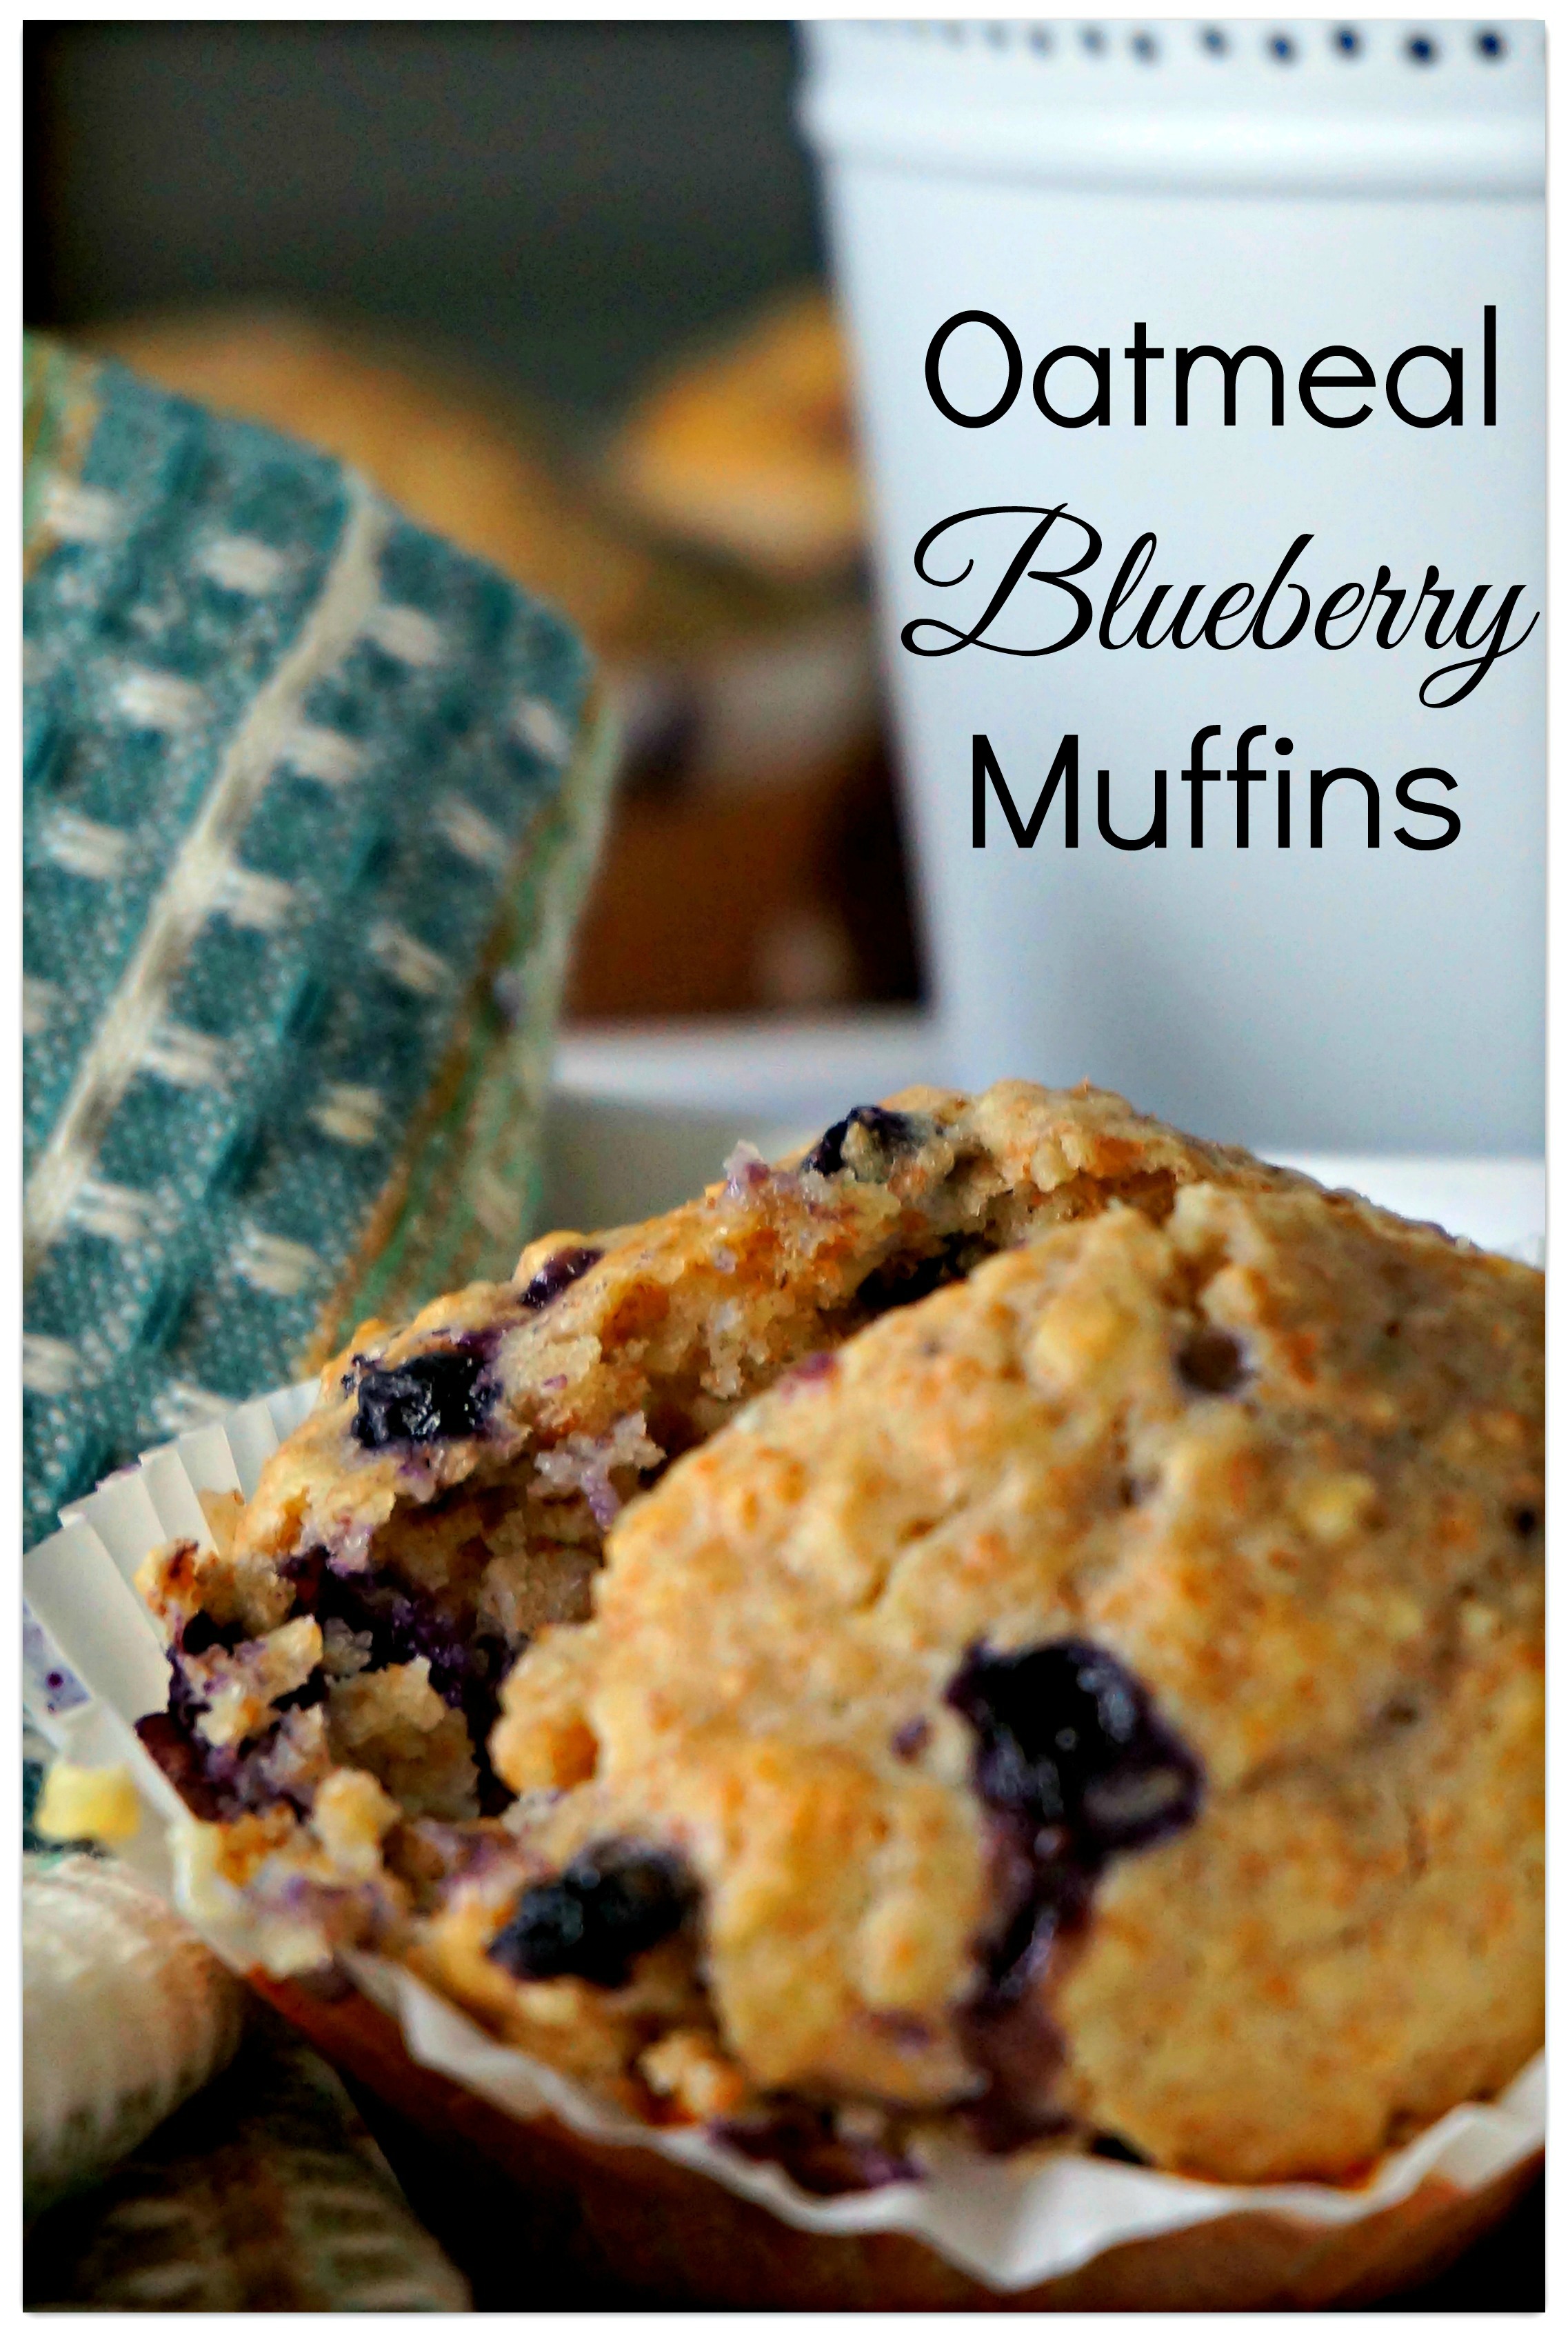 Oatmeal Blueberry Muffins - The Generous Host